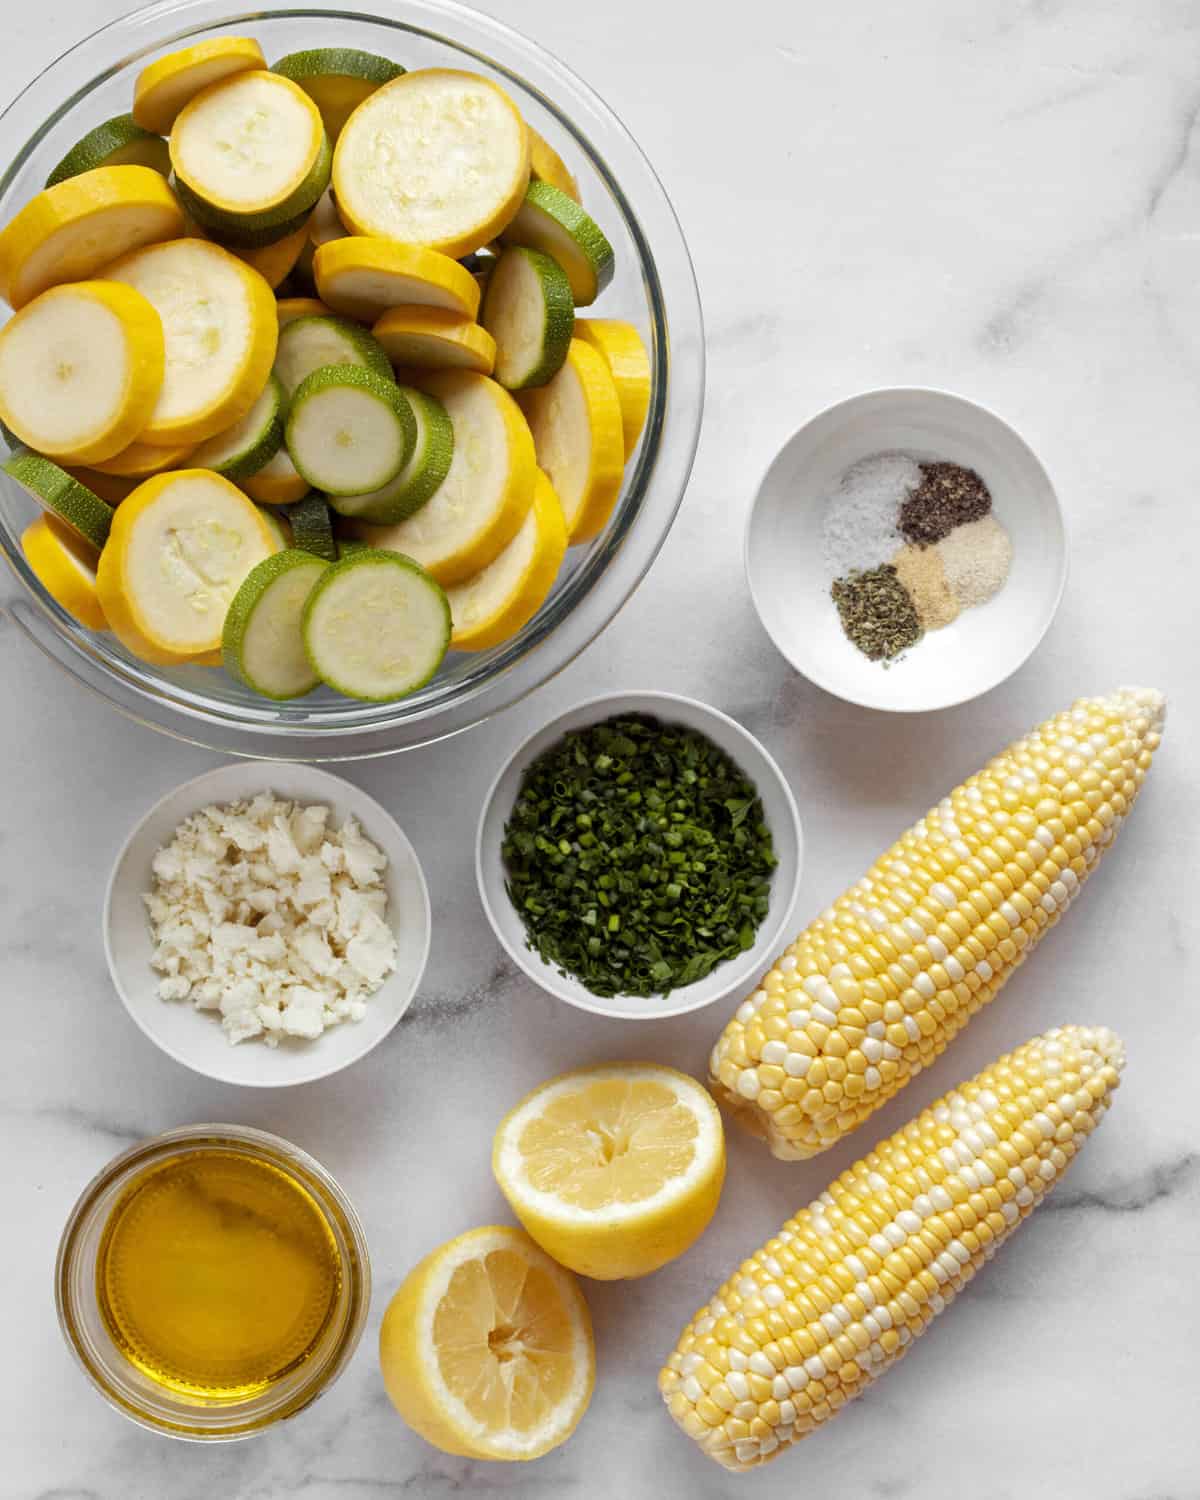 Ingredients including zucchini, yellow squash, corn, spices, feta, olive oil and fresh herbs.